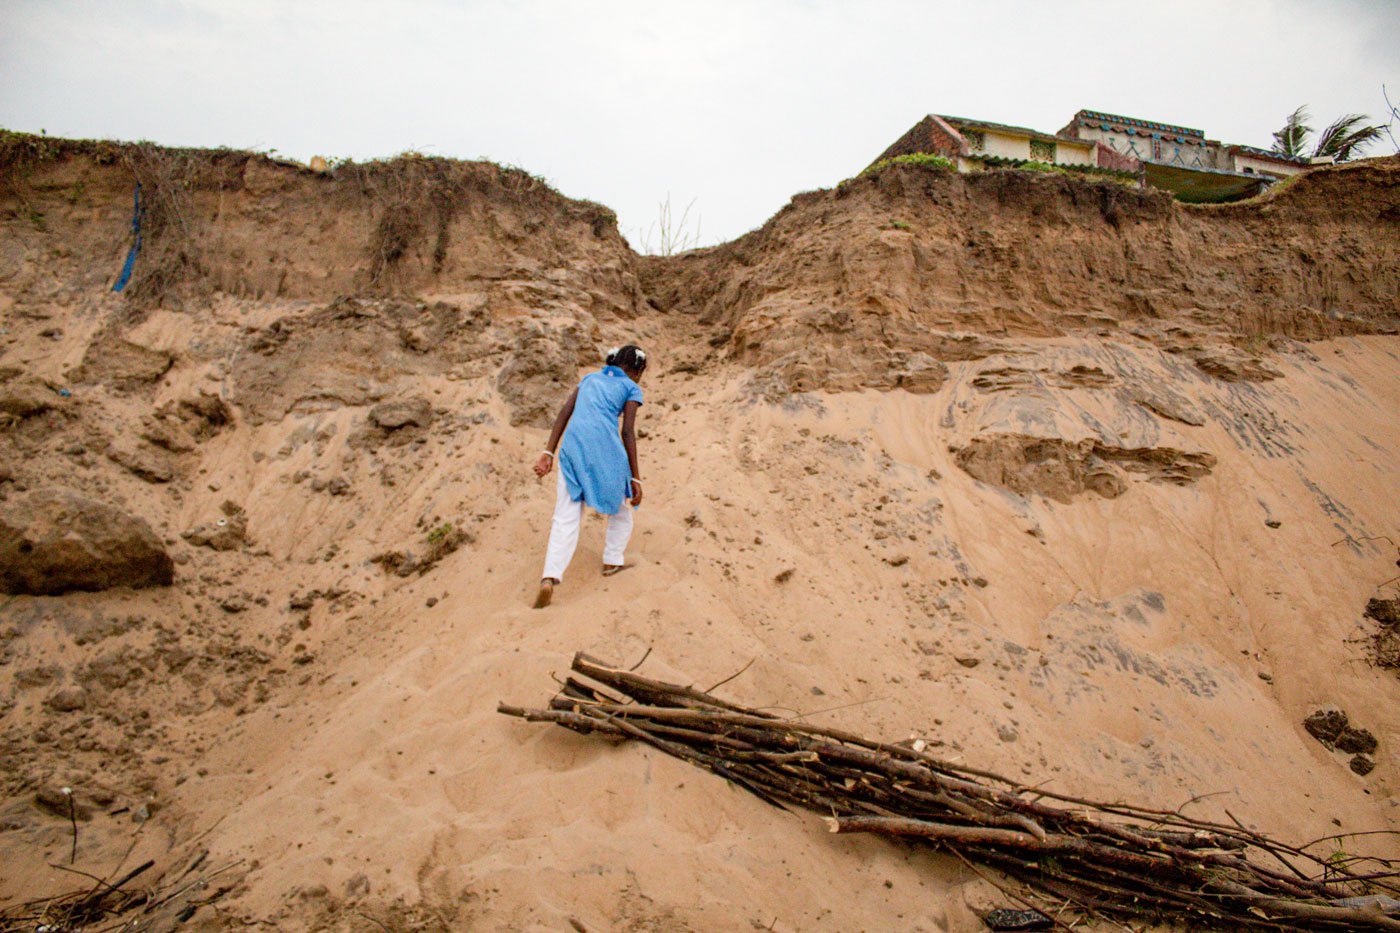 A student from Podampeta village walks home from school. The route has been damaged due to years of relentless erosion by the sea; the entire village has also migrated due to this.